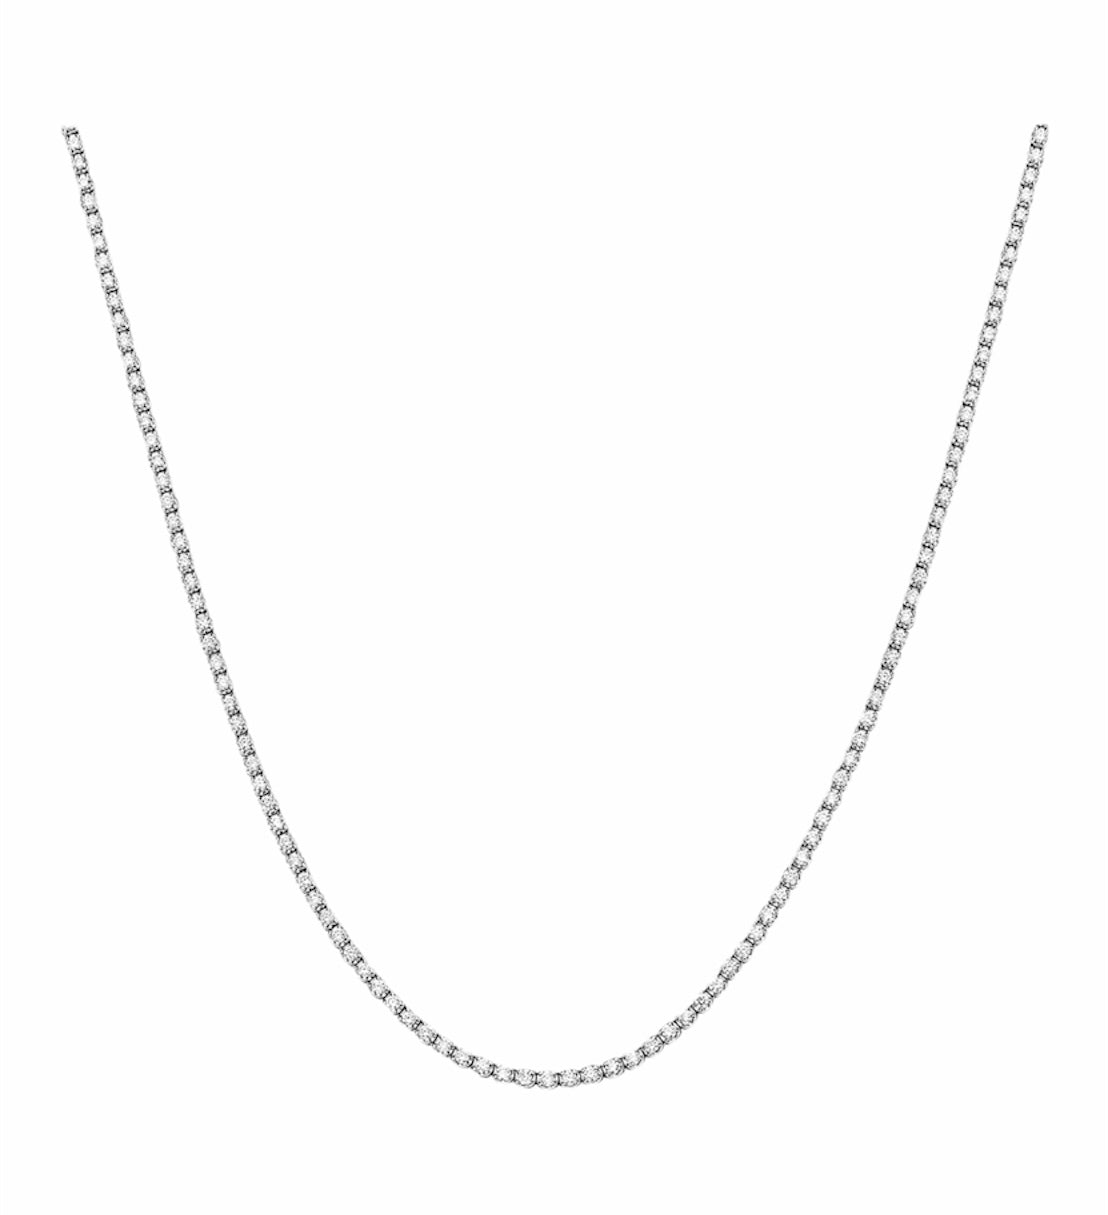 3.3 CTW white gold Tennis Necklace